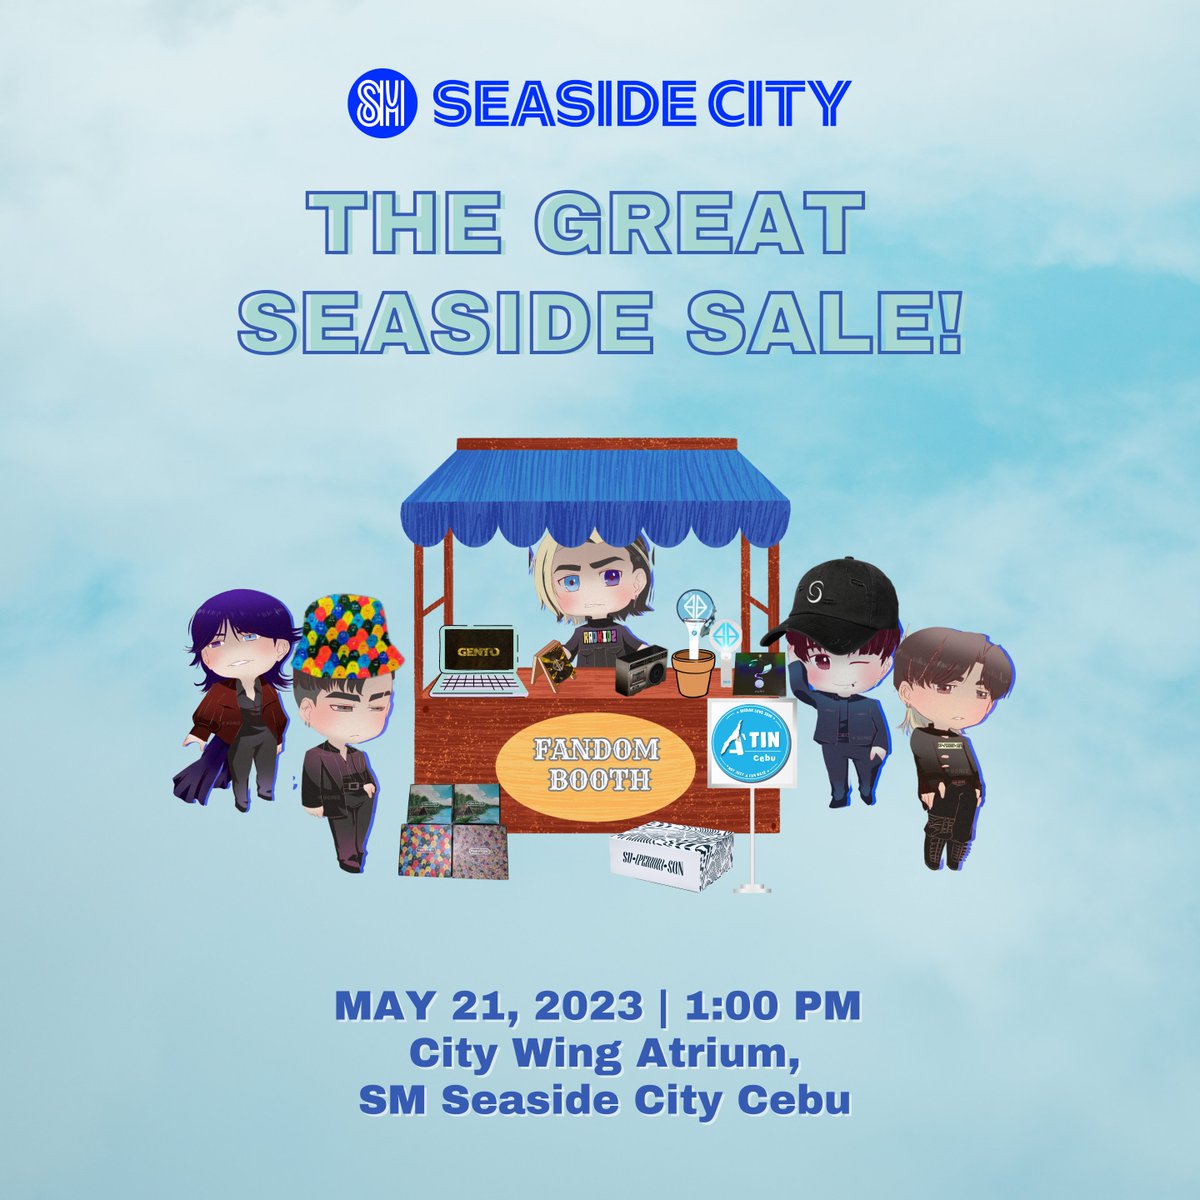 Calling all Cebuano A'TIN and shopaholics! Get ready for an extraordinary event that will make your summer dreams come true!

Join us on May 21, 2023, starting at 1 pm for the Great Seaside Sale Fandom booth at the stunning @SMSeasideCebu City Wing Atrium!

@SB19Official #SB19